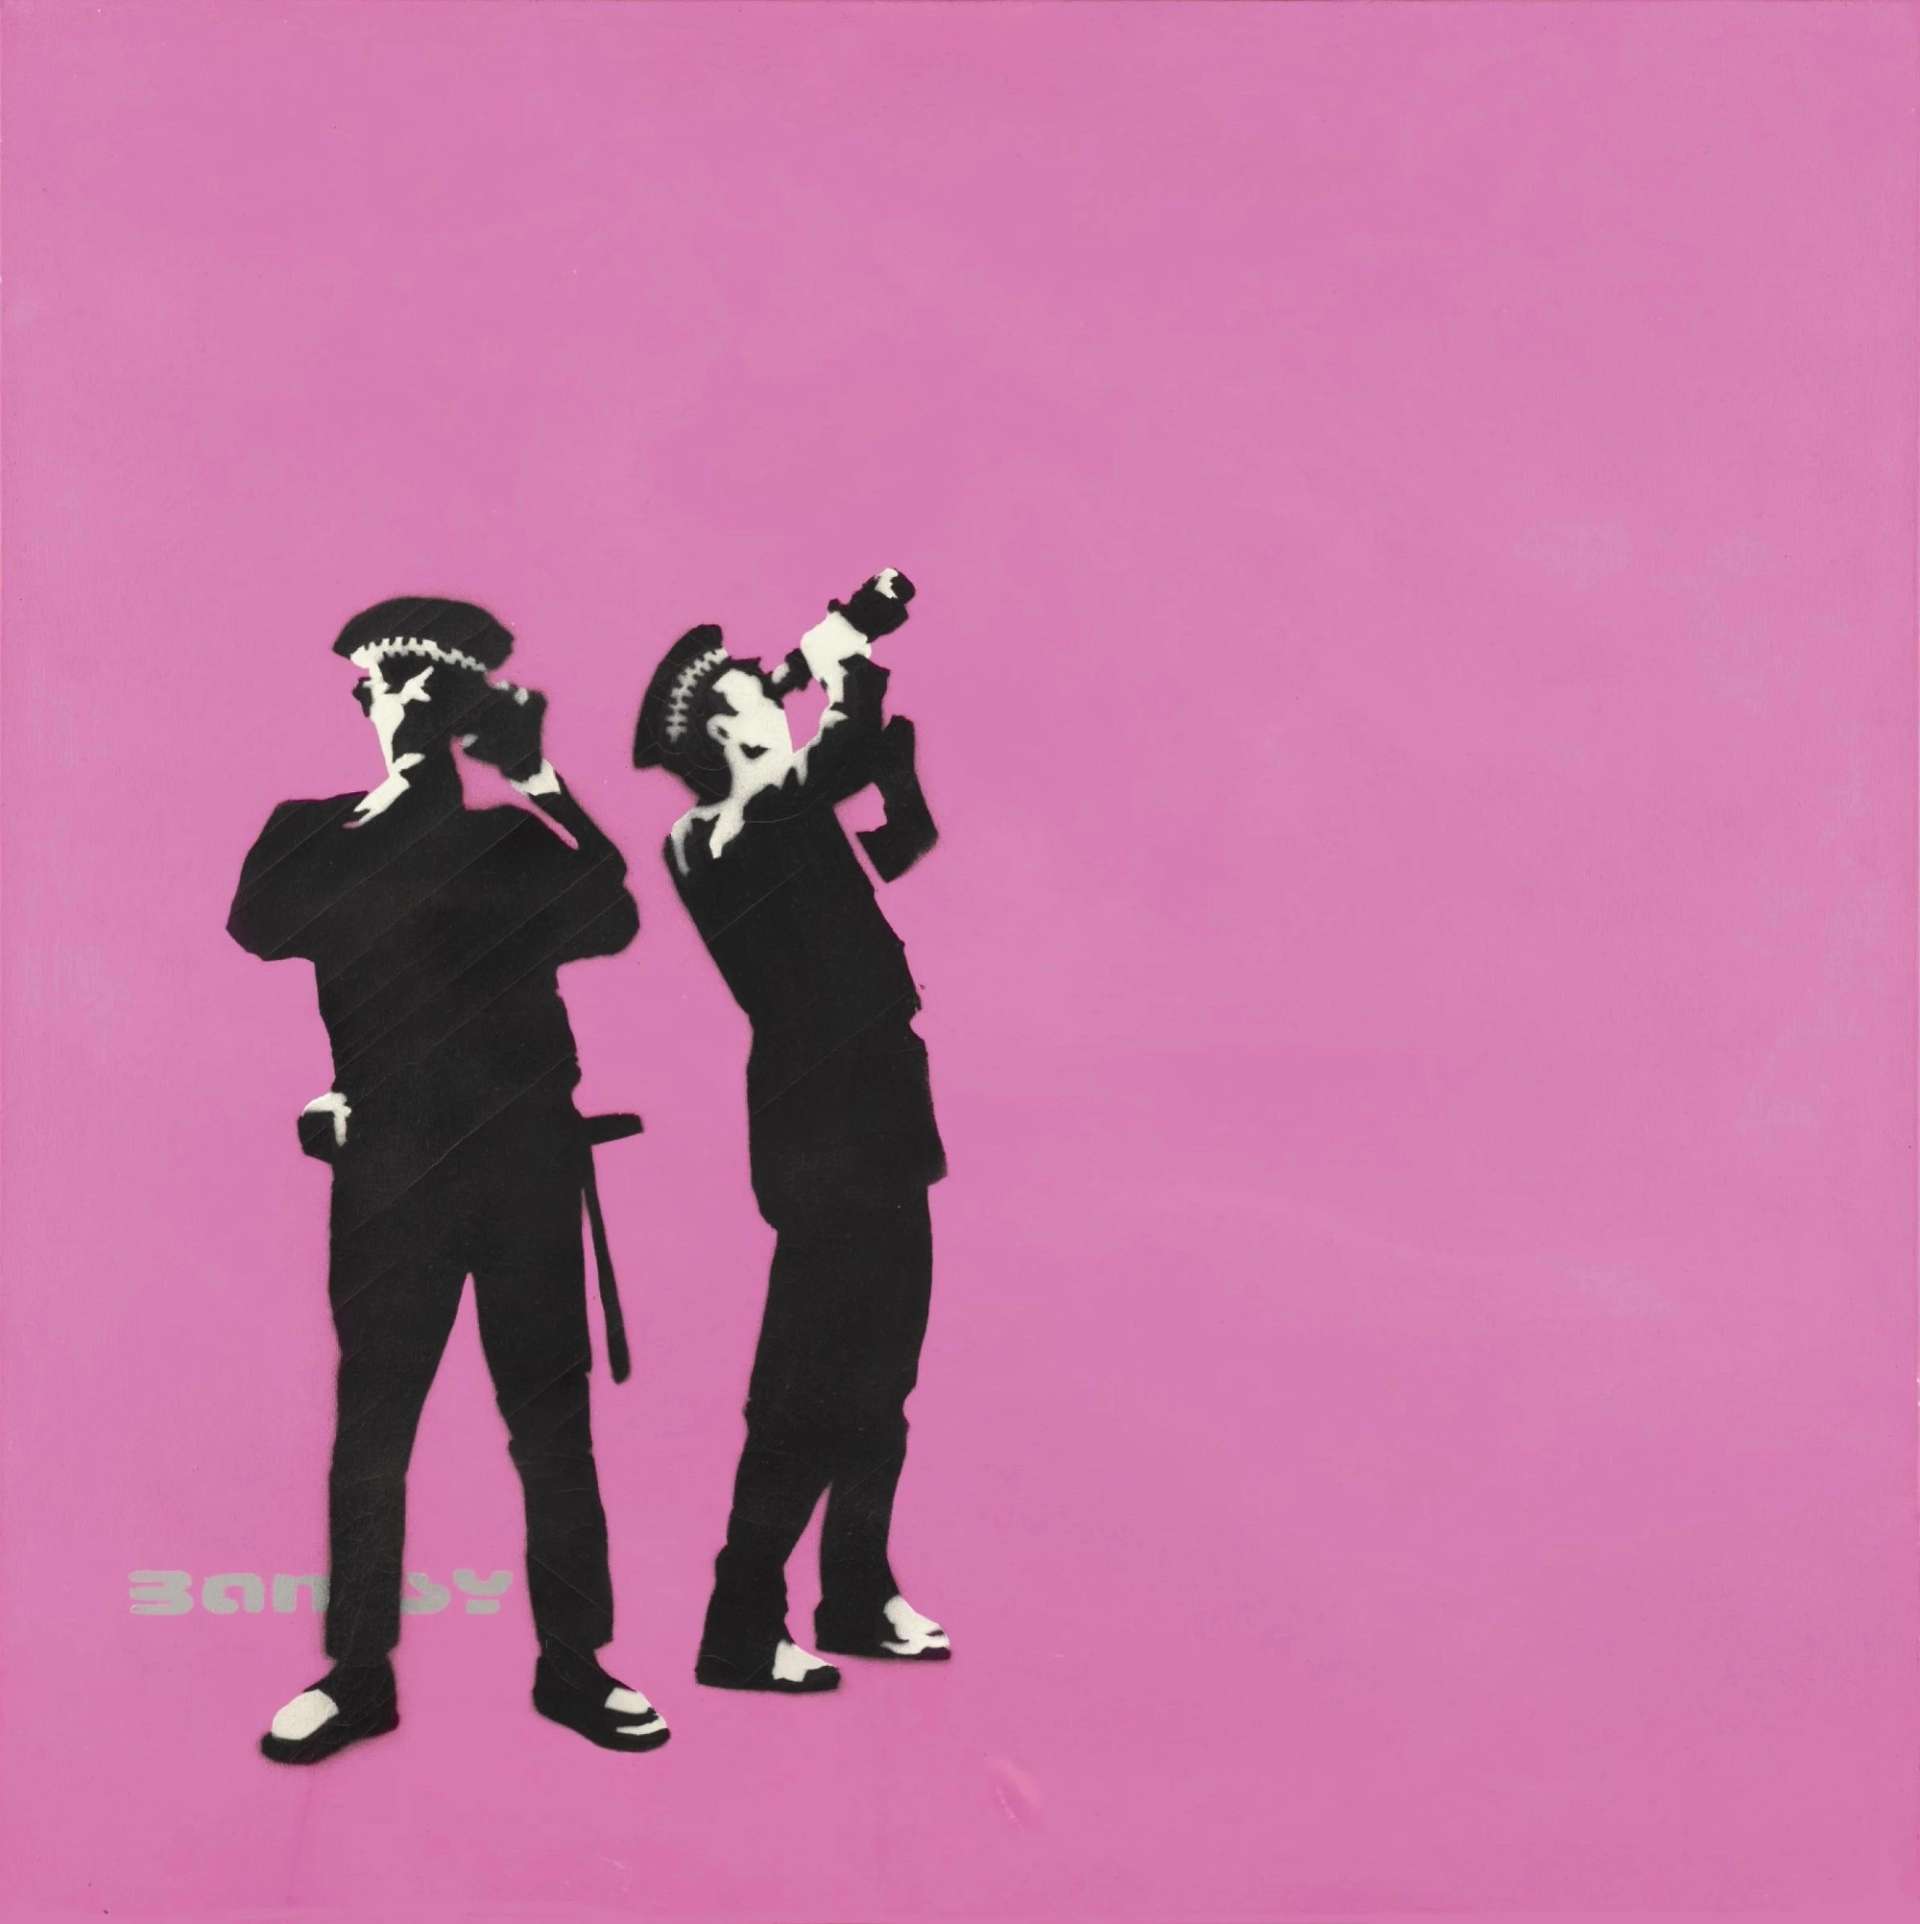 Two police officers gazing into binoculars against a pink background.